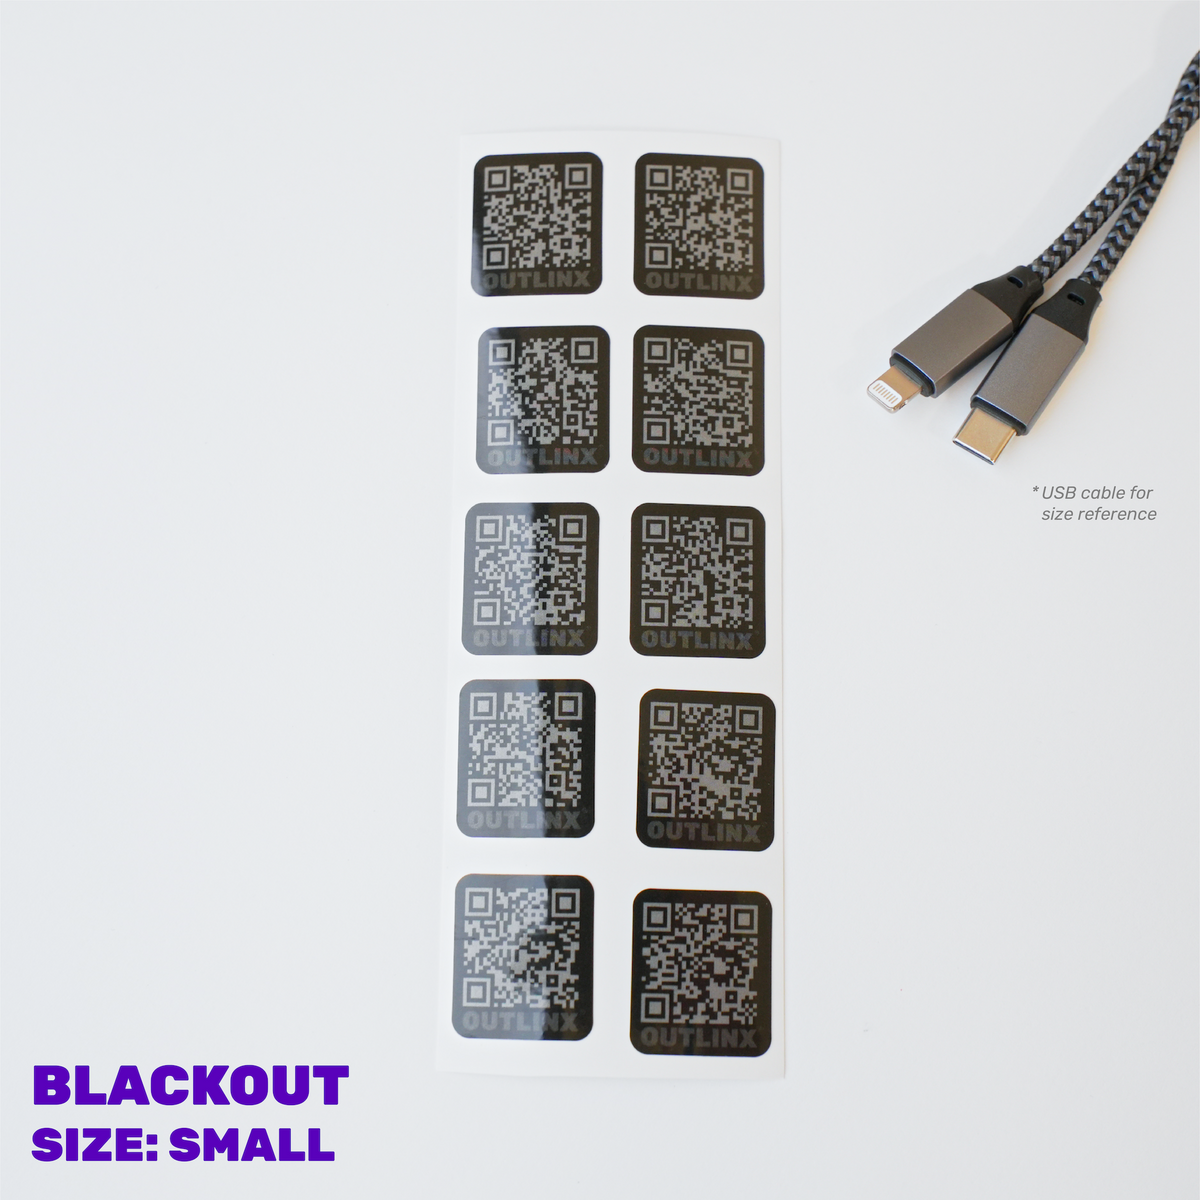 Outlinx Blackout QR Smart Stickers - Build Your Own Pack